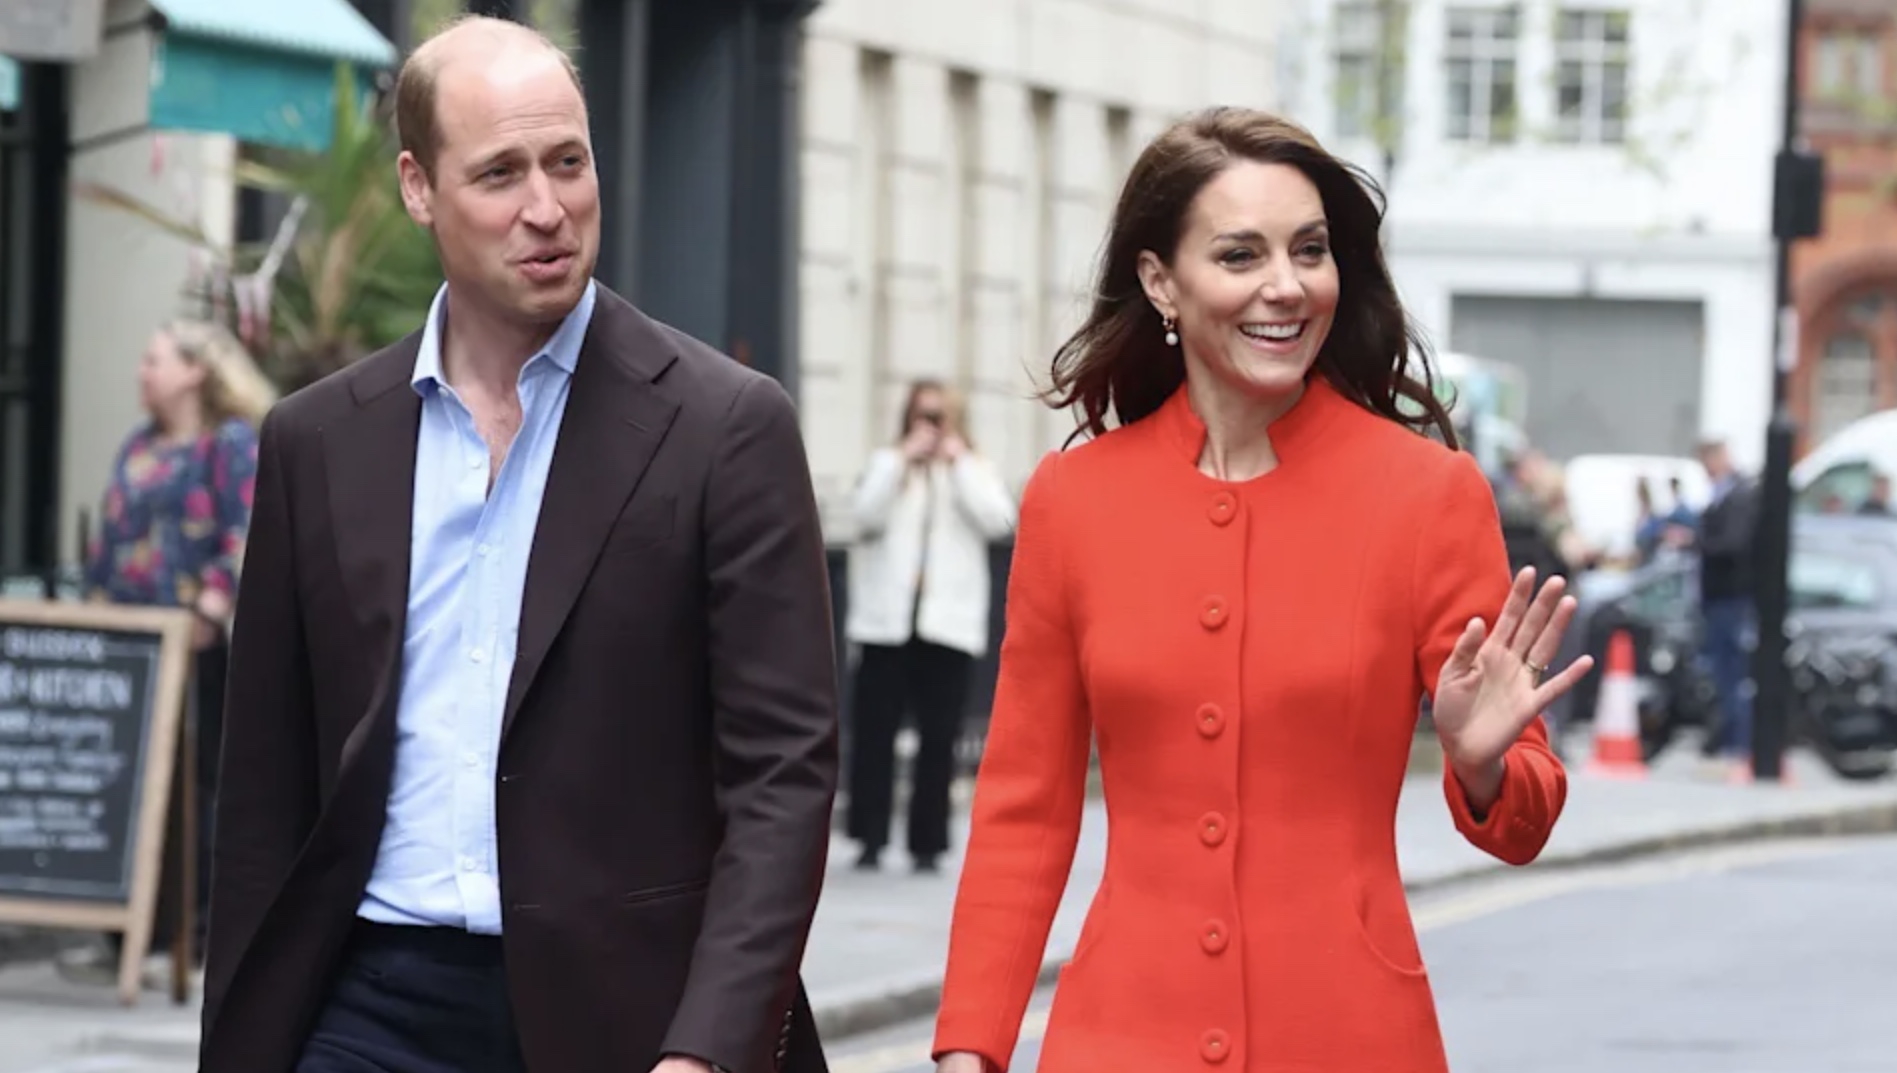 "Are Prince William and Kate's expensive jewelry and clothing overshadowing their Attempts to Connect with the Public?"